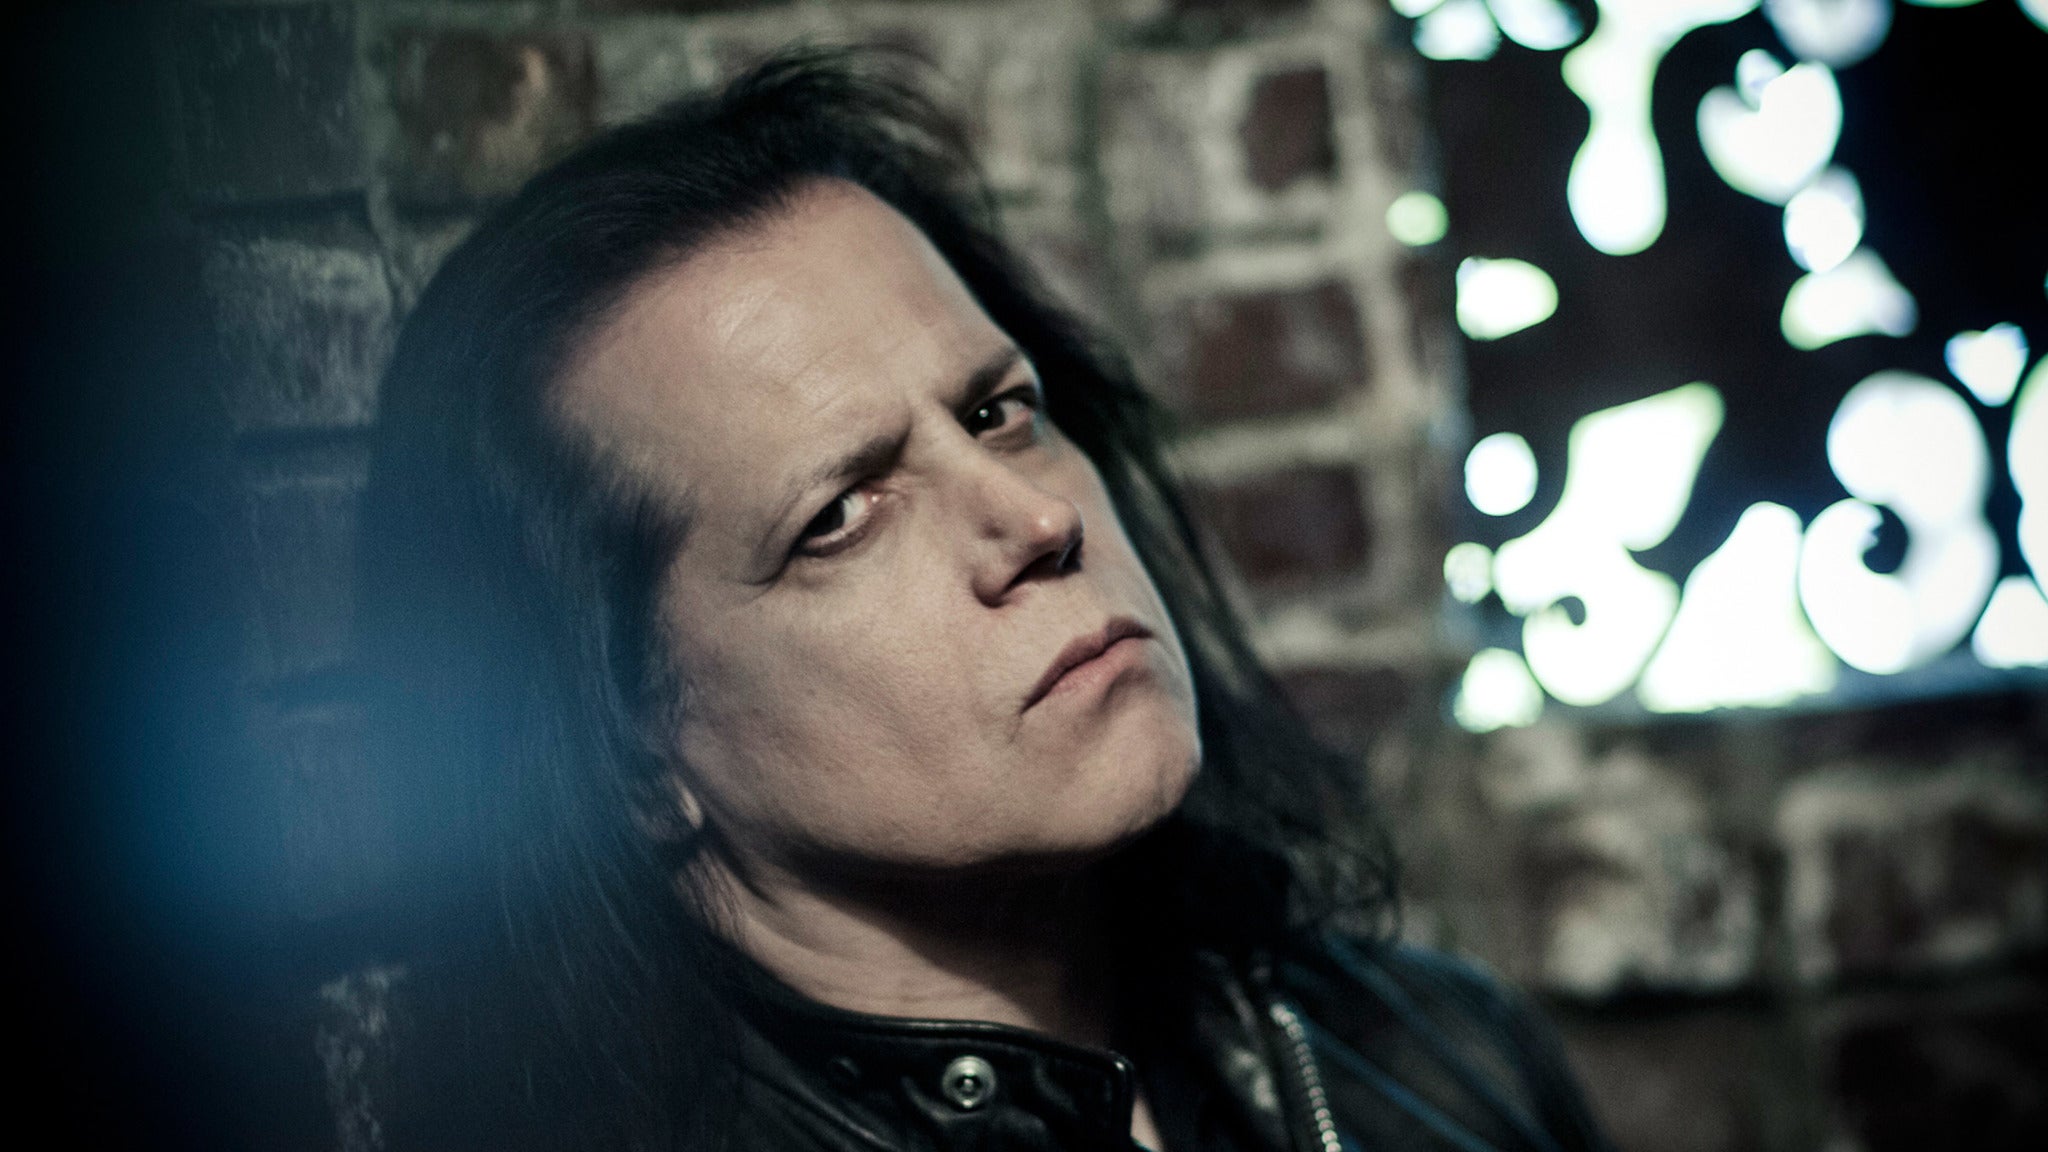 working presale password to Danzig affordable tickets in Atlanta at Coca-Cola Roxy